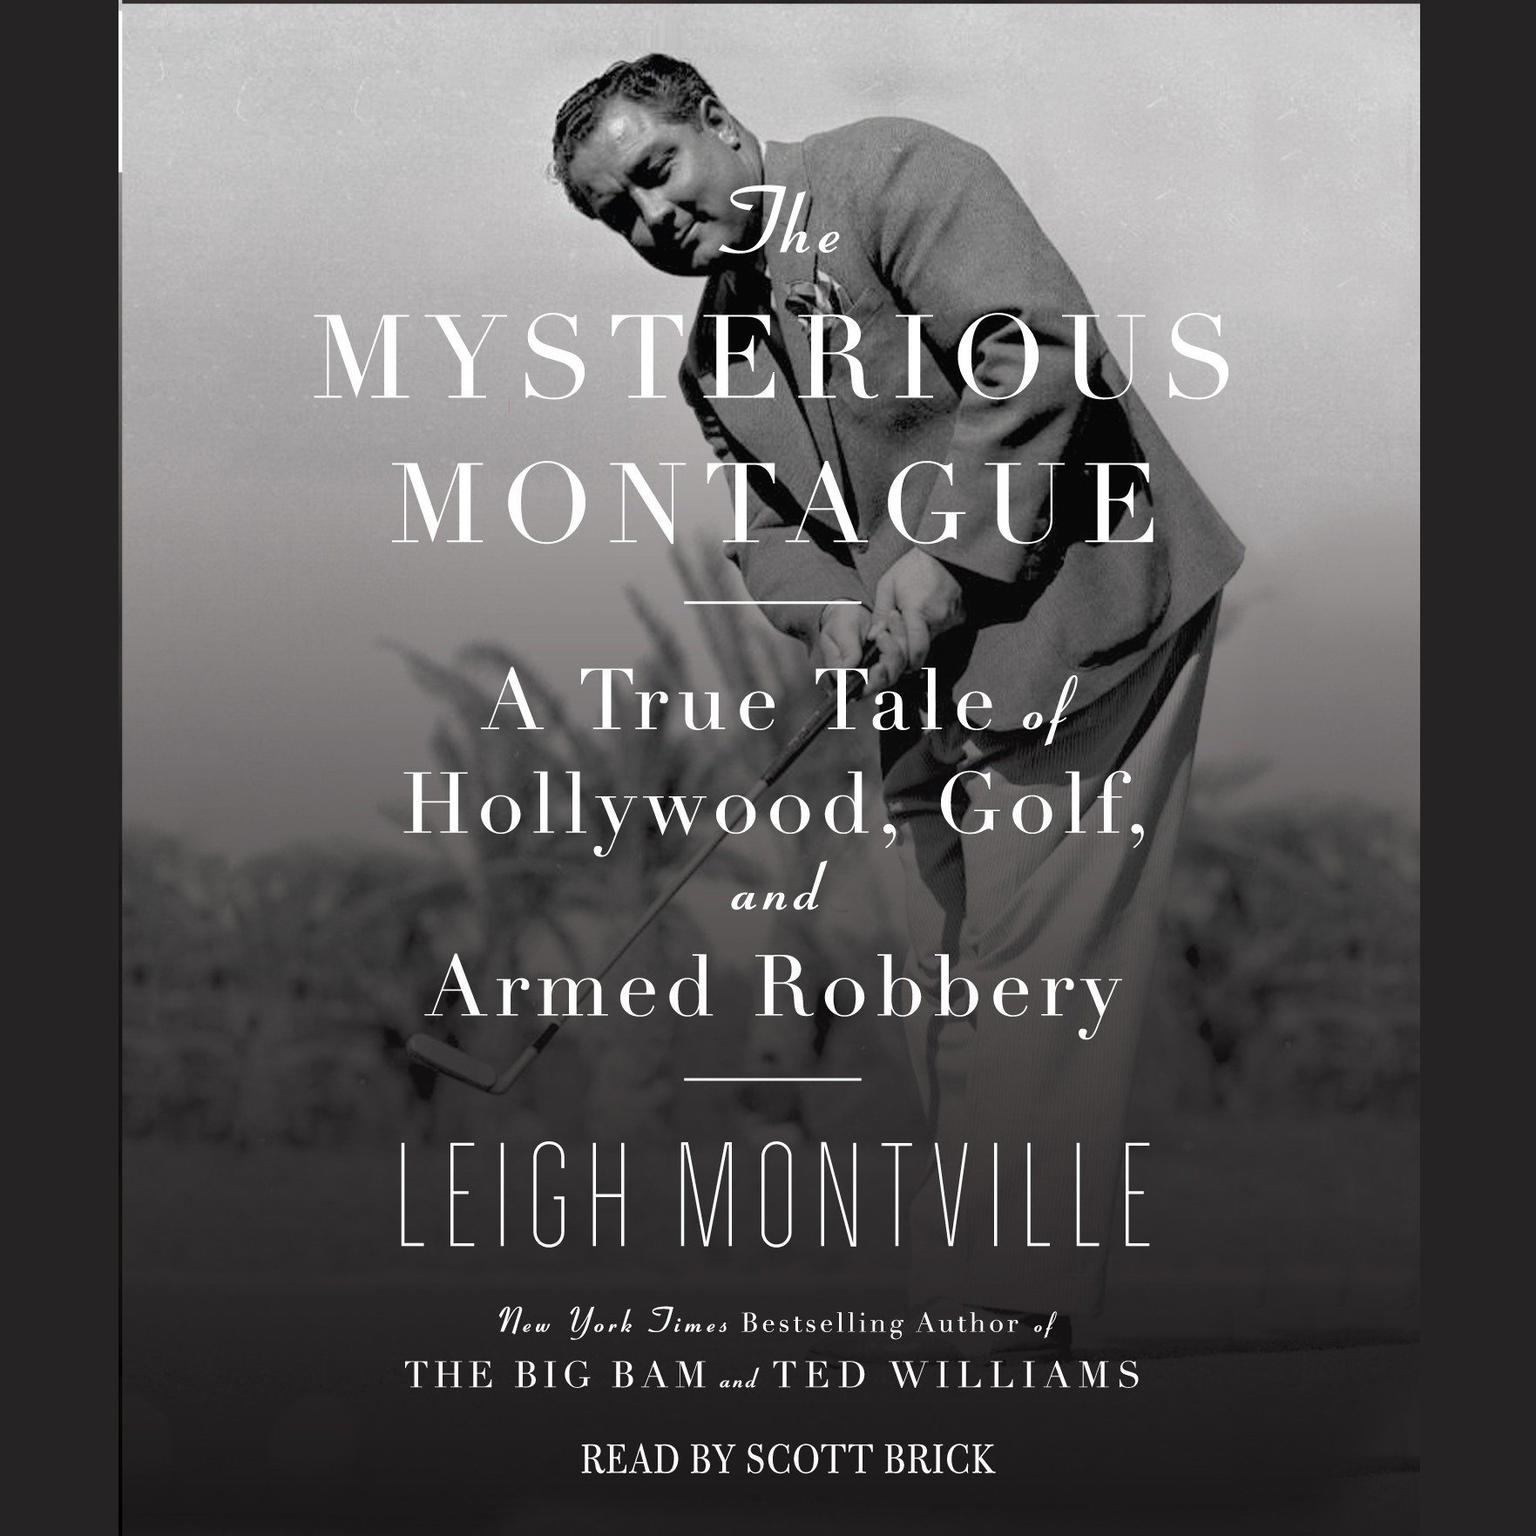 The Mysterious Montague (Abridged): A True Tale of Hollywood, Golf, and Armed Robbery Audiobook, by Leigh Montville